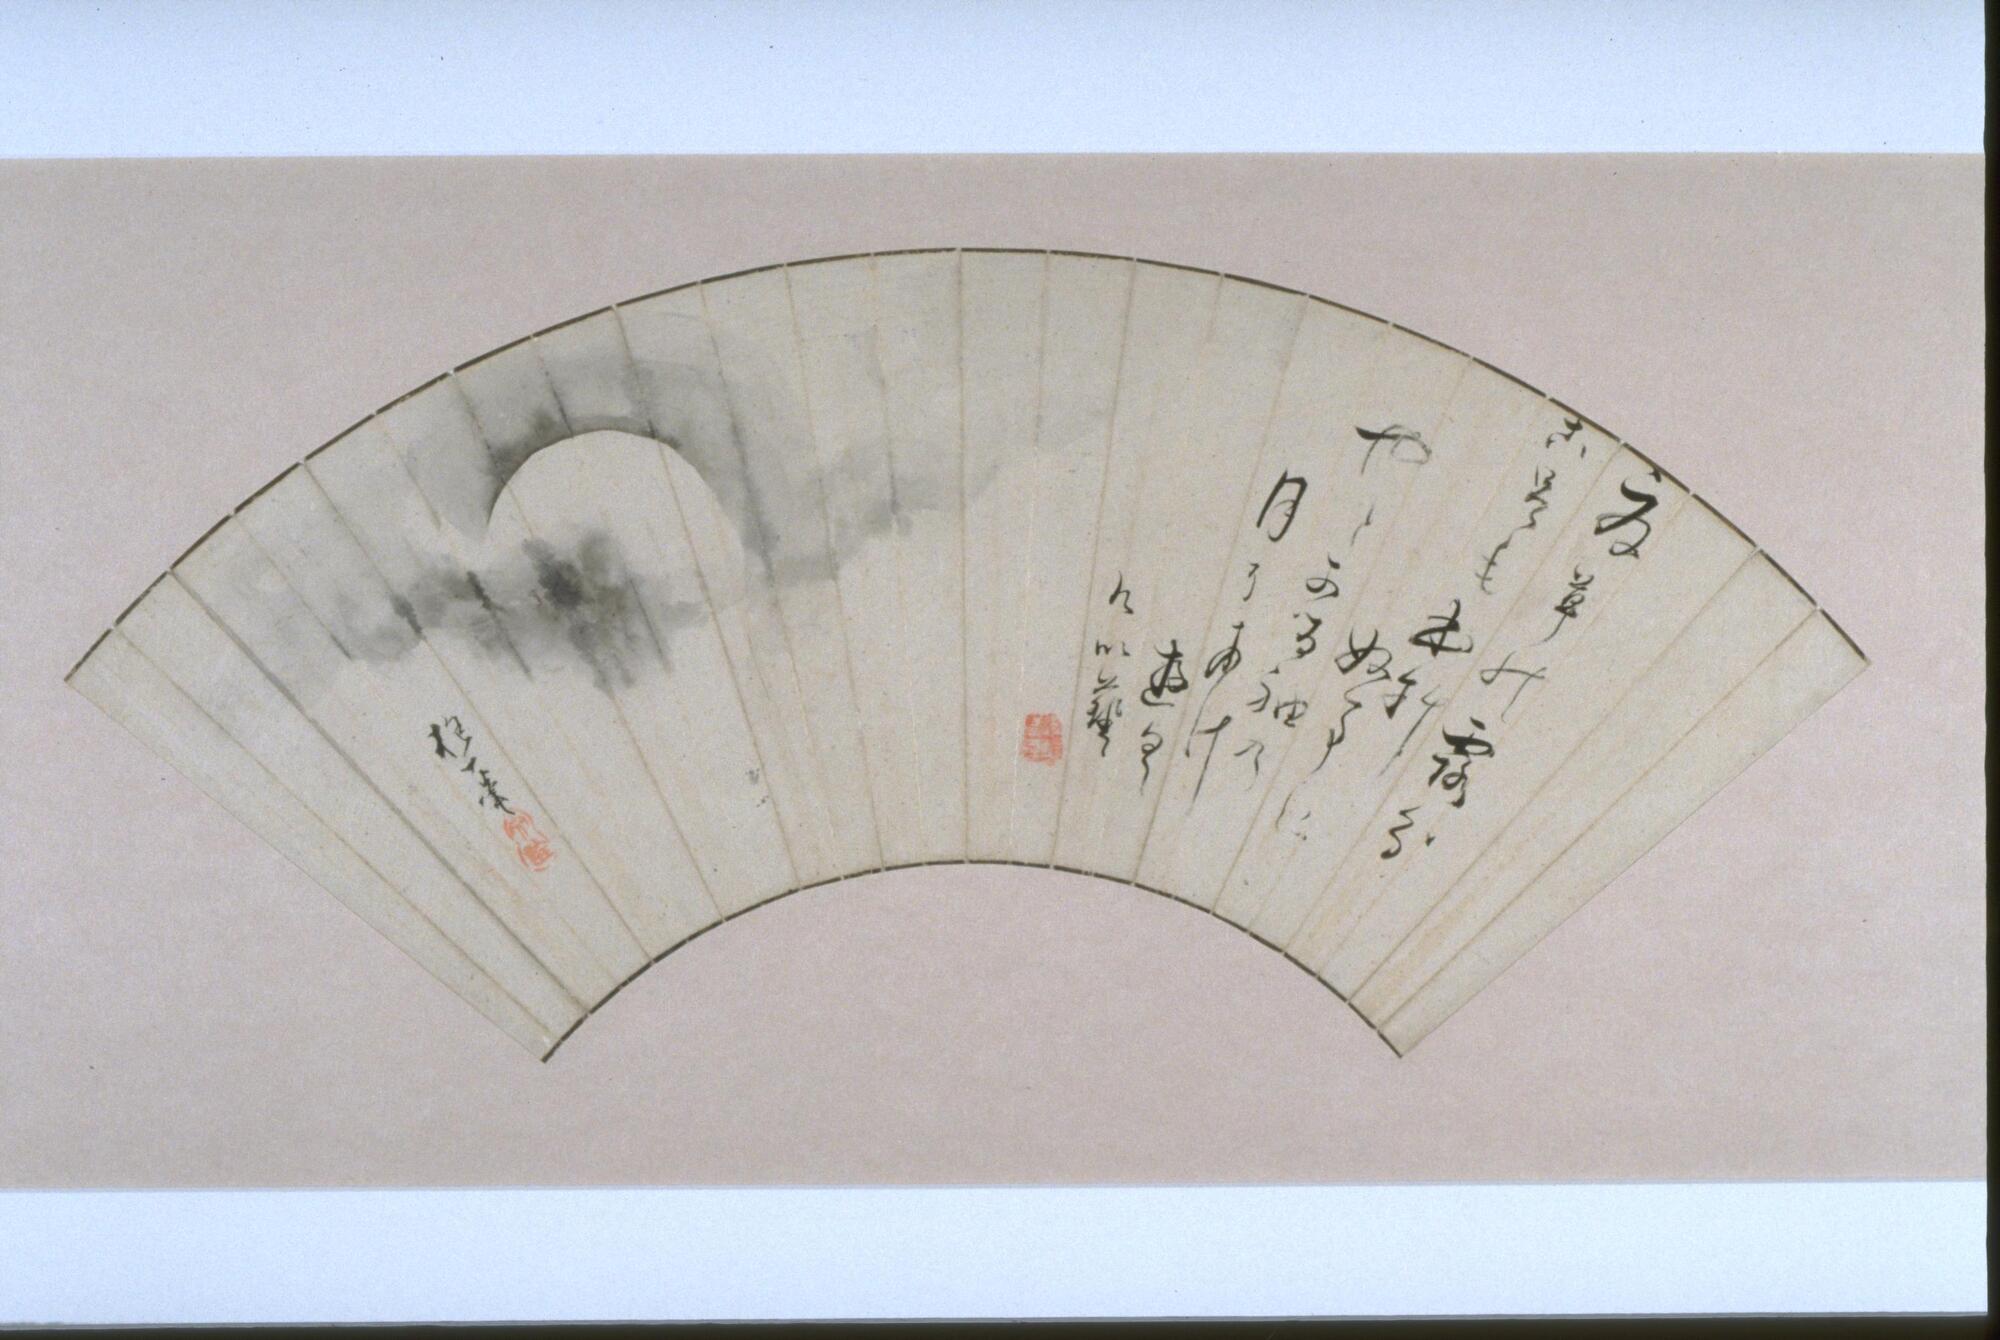 This is a painting of a fan. As for the details on the fan, on the left side, there is a drawing of the full moon partly&nbsp;hidden behind clouds. On the right side is writing in calligraphy. There is another line of calligraphy&nbsp;father&nbsp;to the left of the moon. Some of the writing is in red.